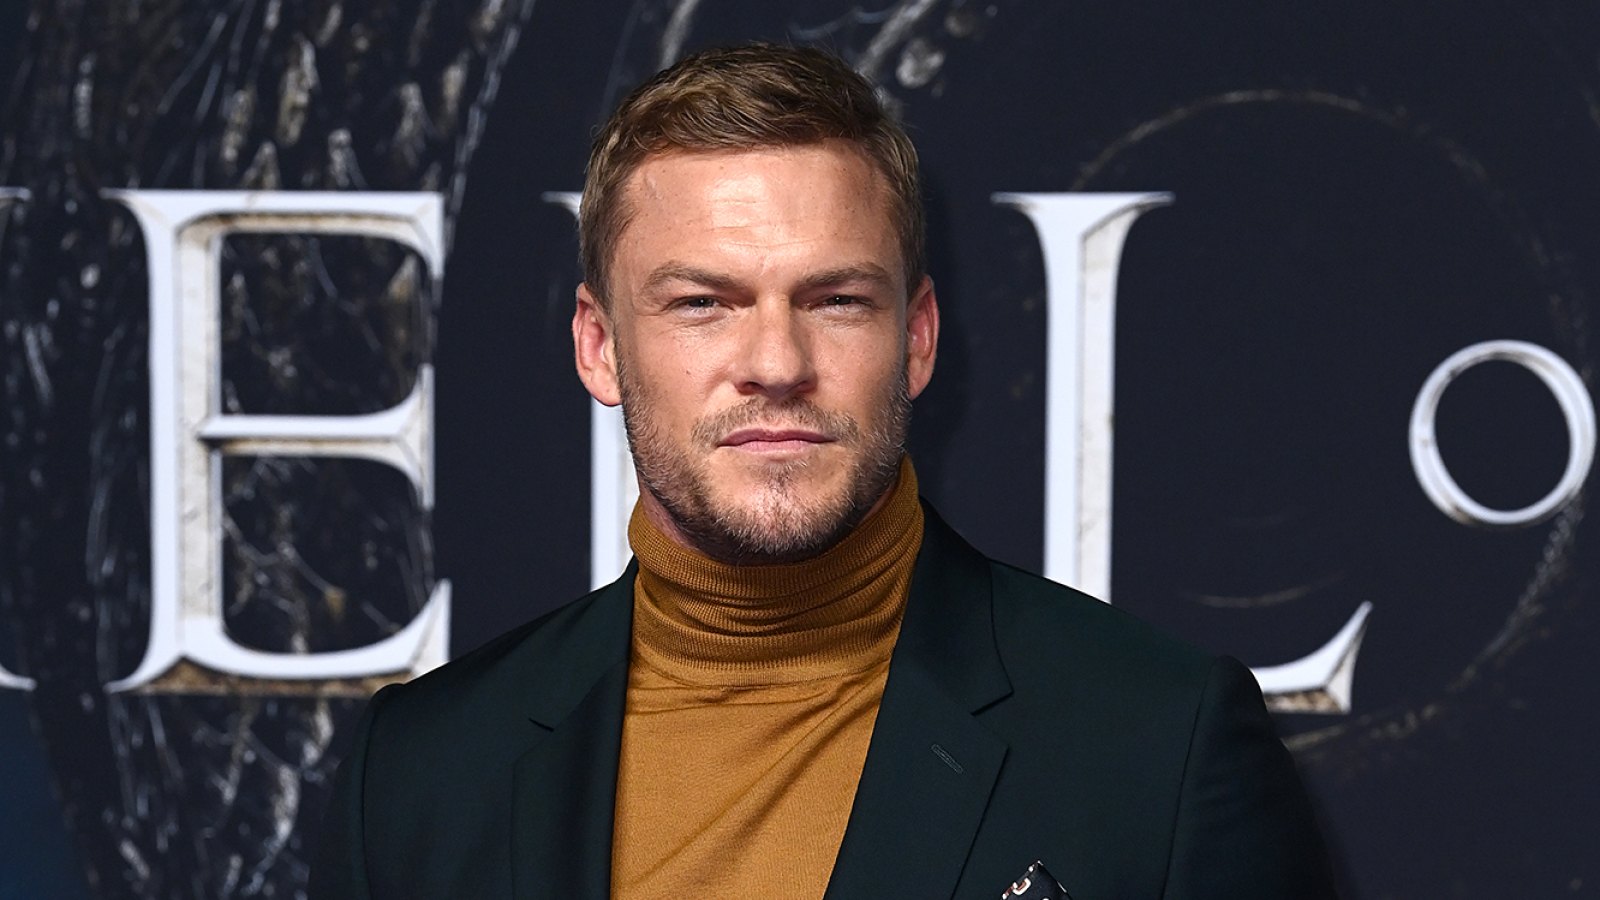 Reacher’s Alan Ritchson Says His Wife, 3 Kids Were Rear-Ended in Car Accident: ‘No Serious Injuries’